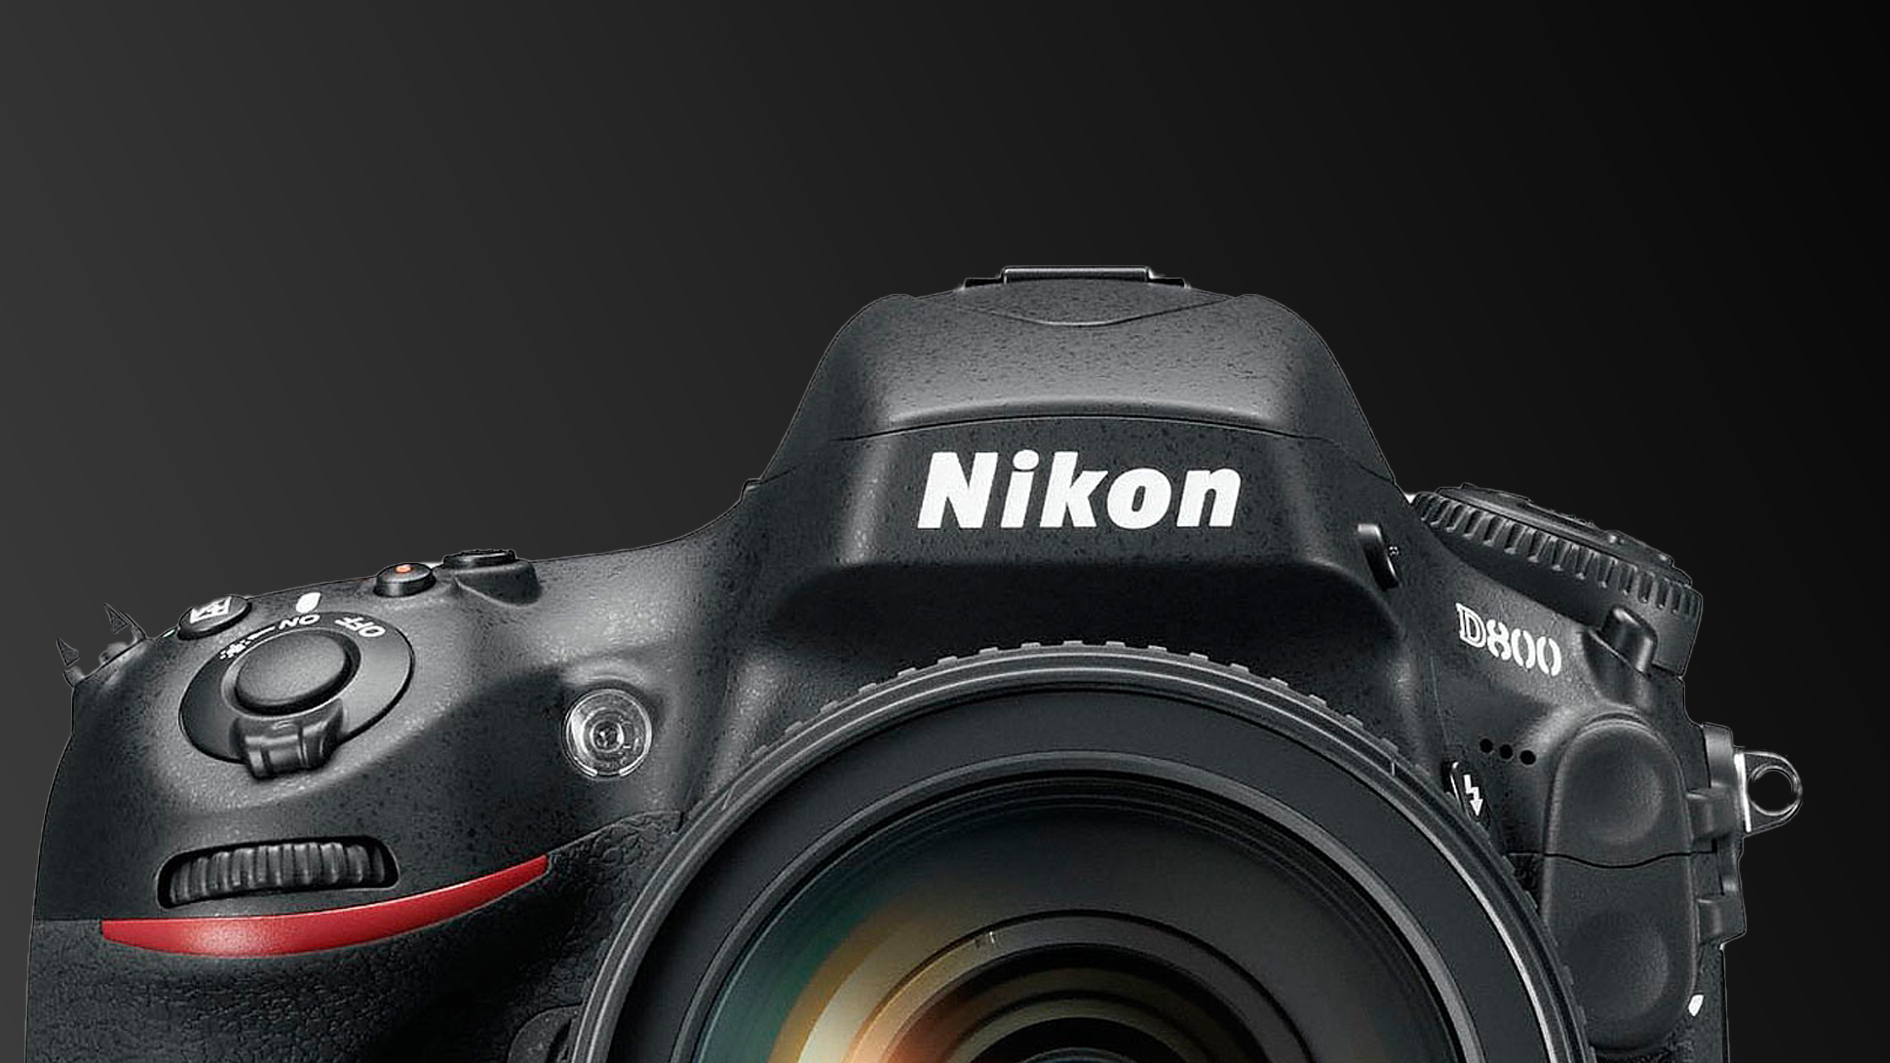 The Nikon D800 is officially 10 years old, and it's still a great camera,  even today Digital Camera World